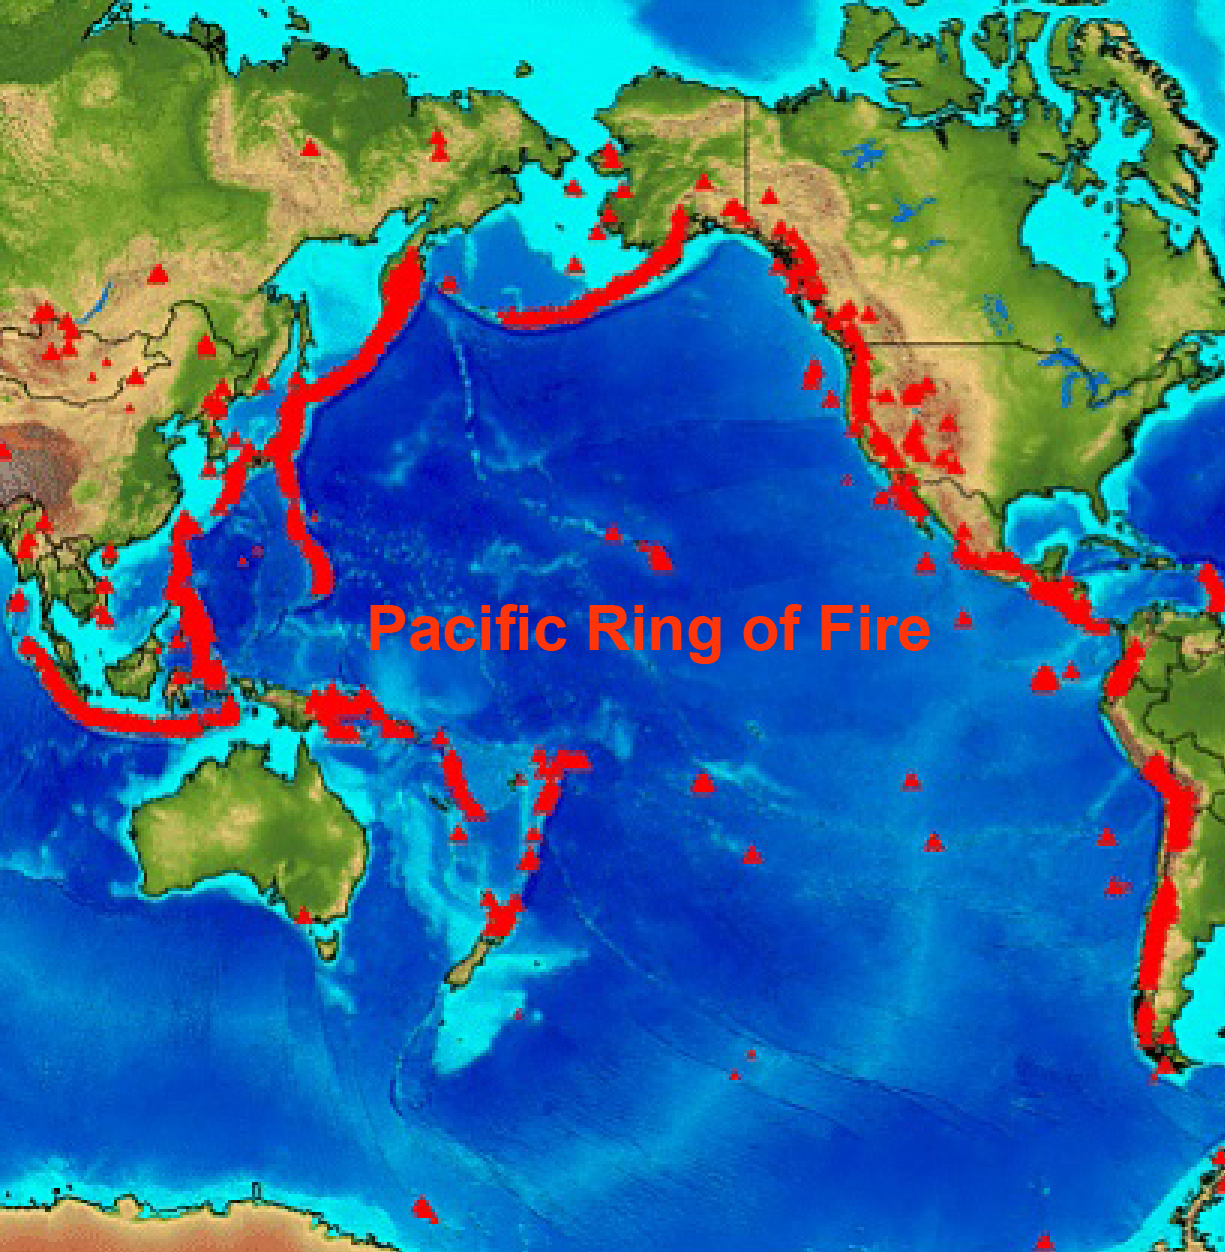 2. The Pacific Ring of Fire | Download Scientific Diagram